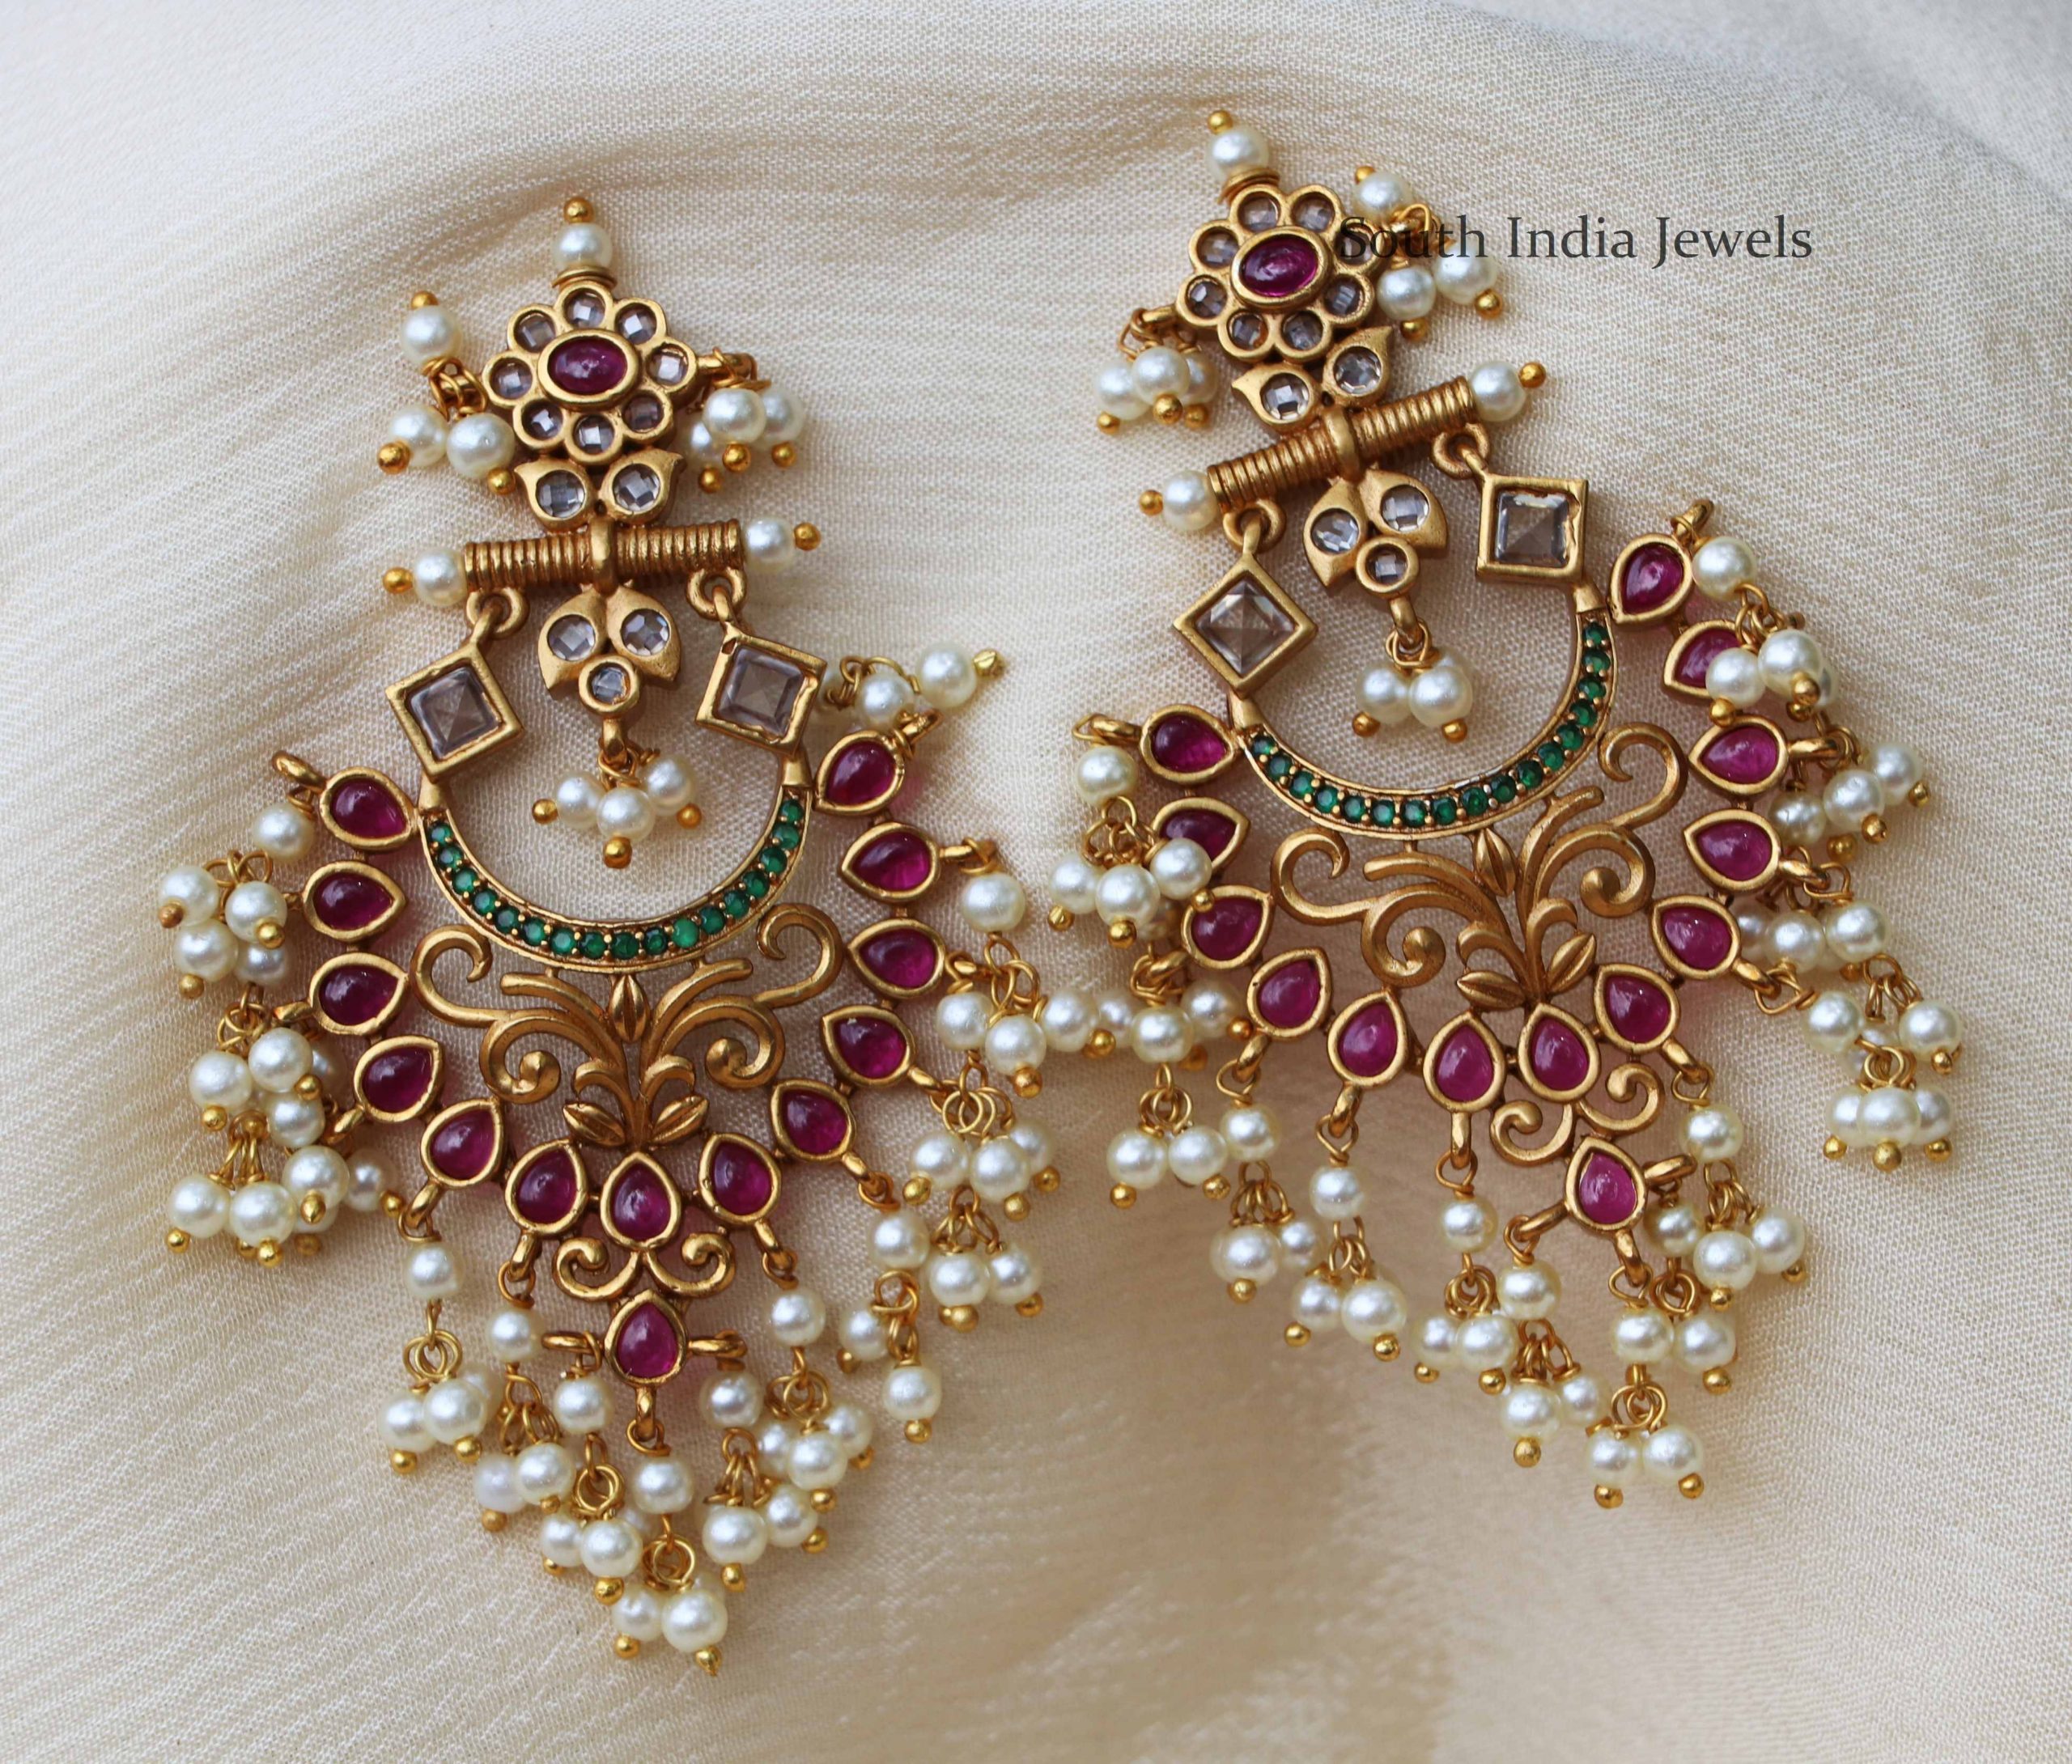 Pearl Cluster Earrings South India Jewels